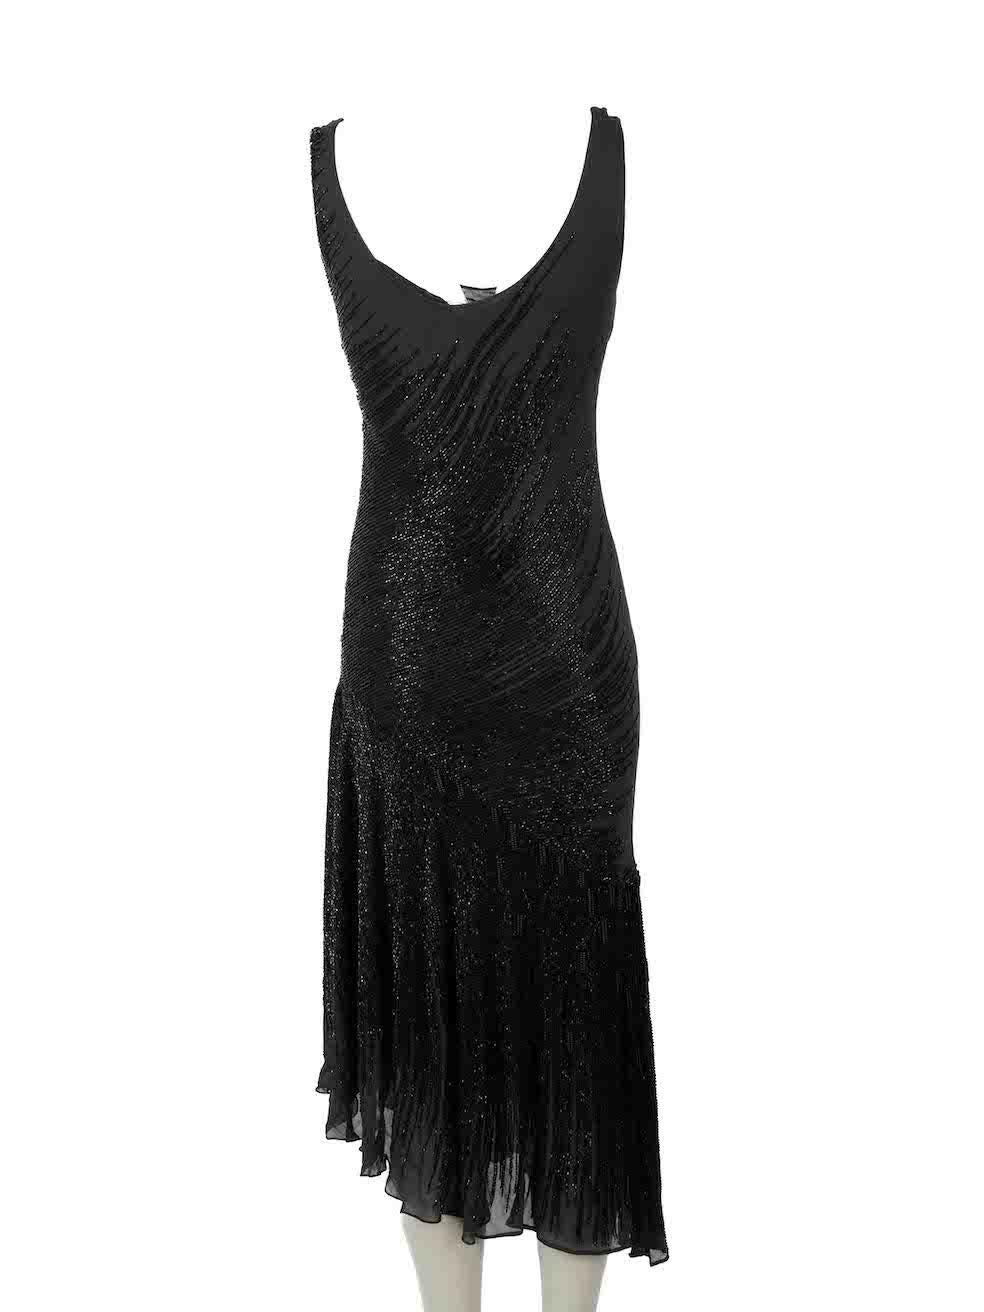 Amanda Wakeley Black Silk Embellished Dress Size M In Excellent Condition For Sale In London, GB